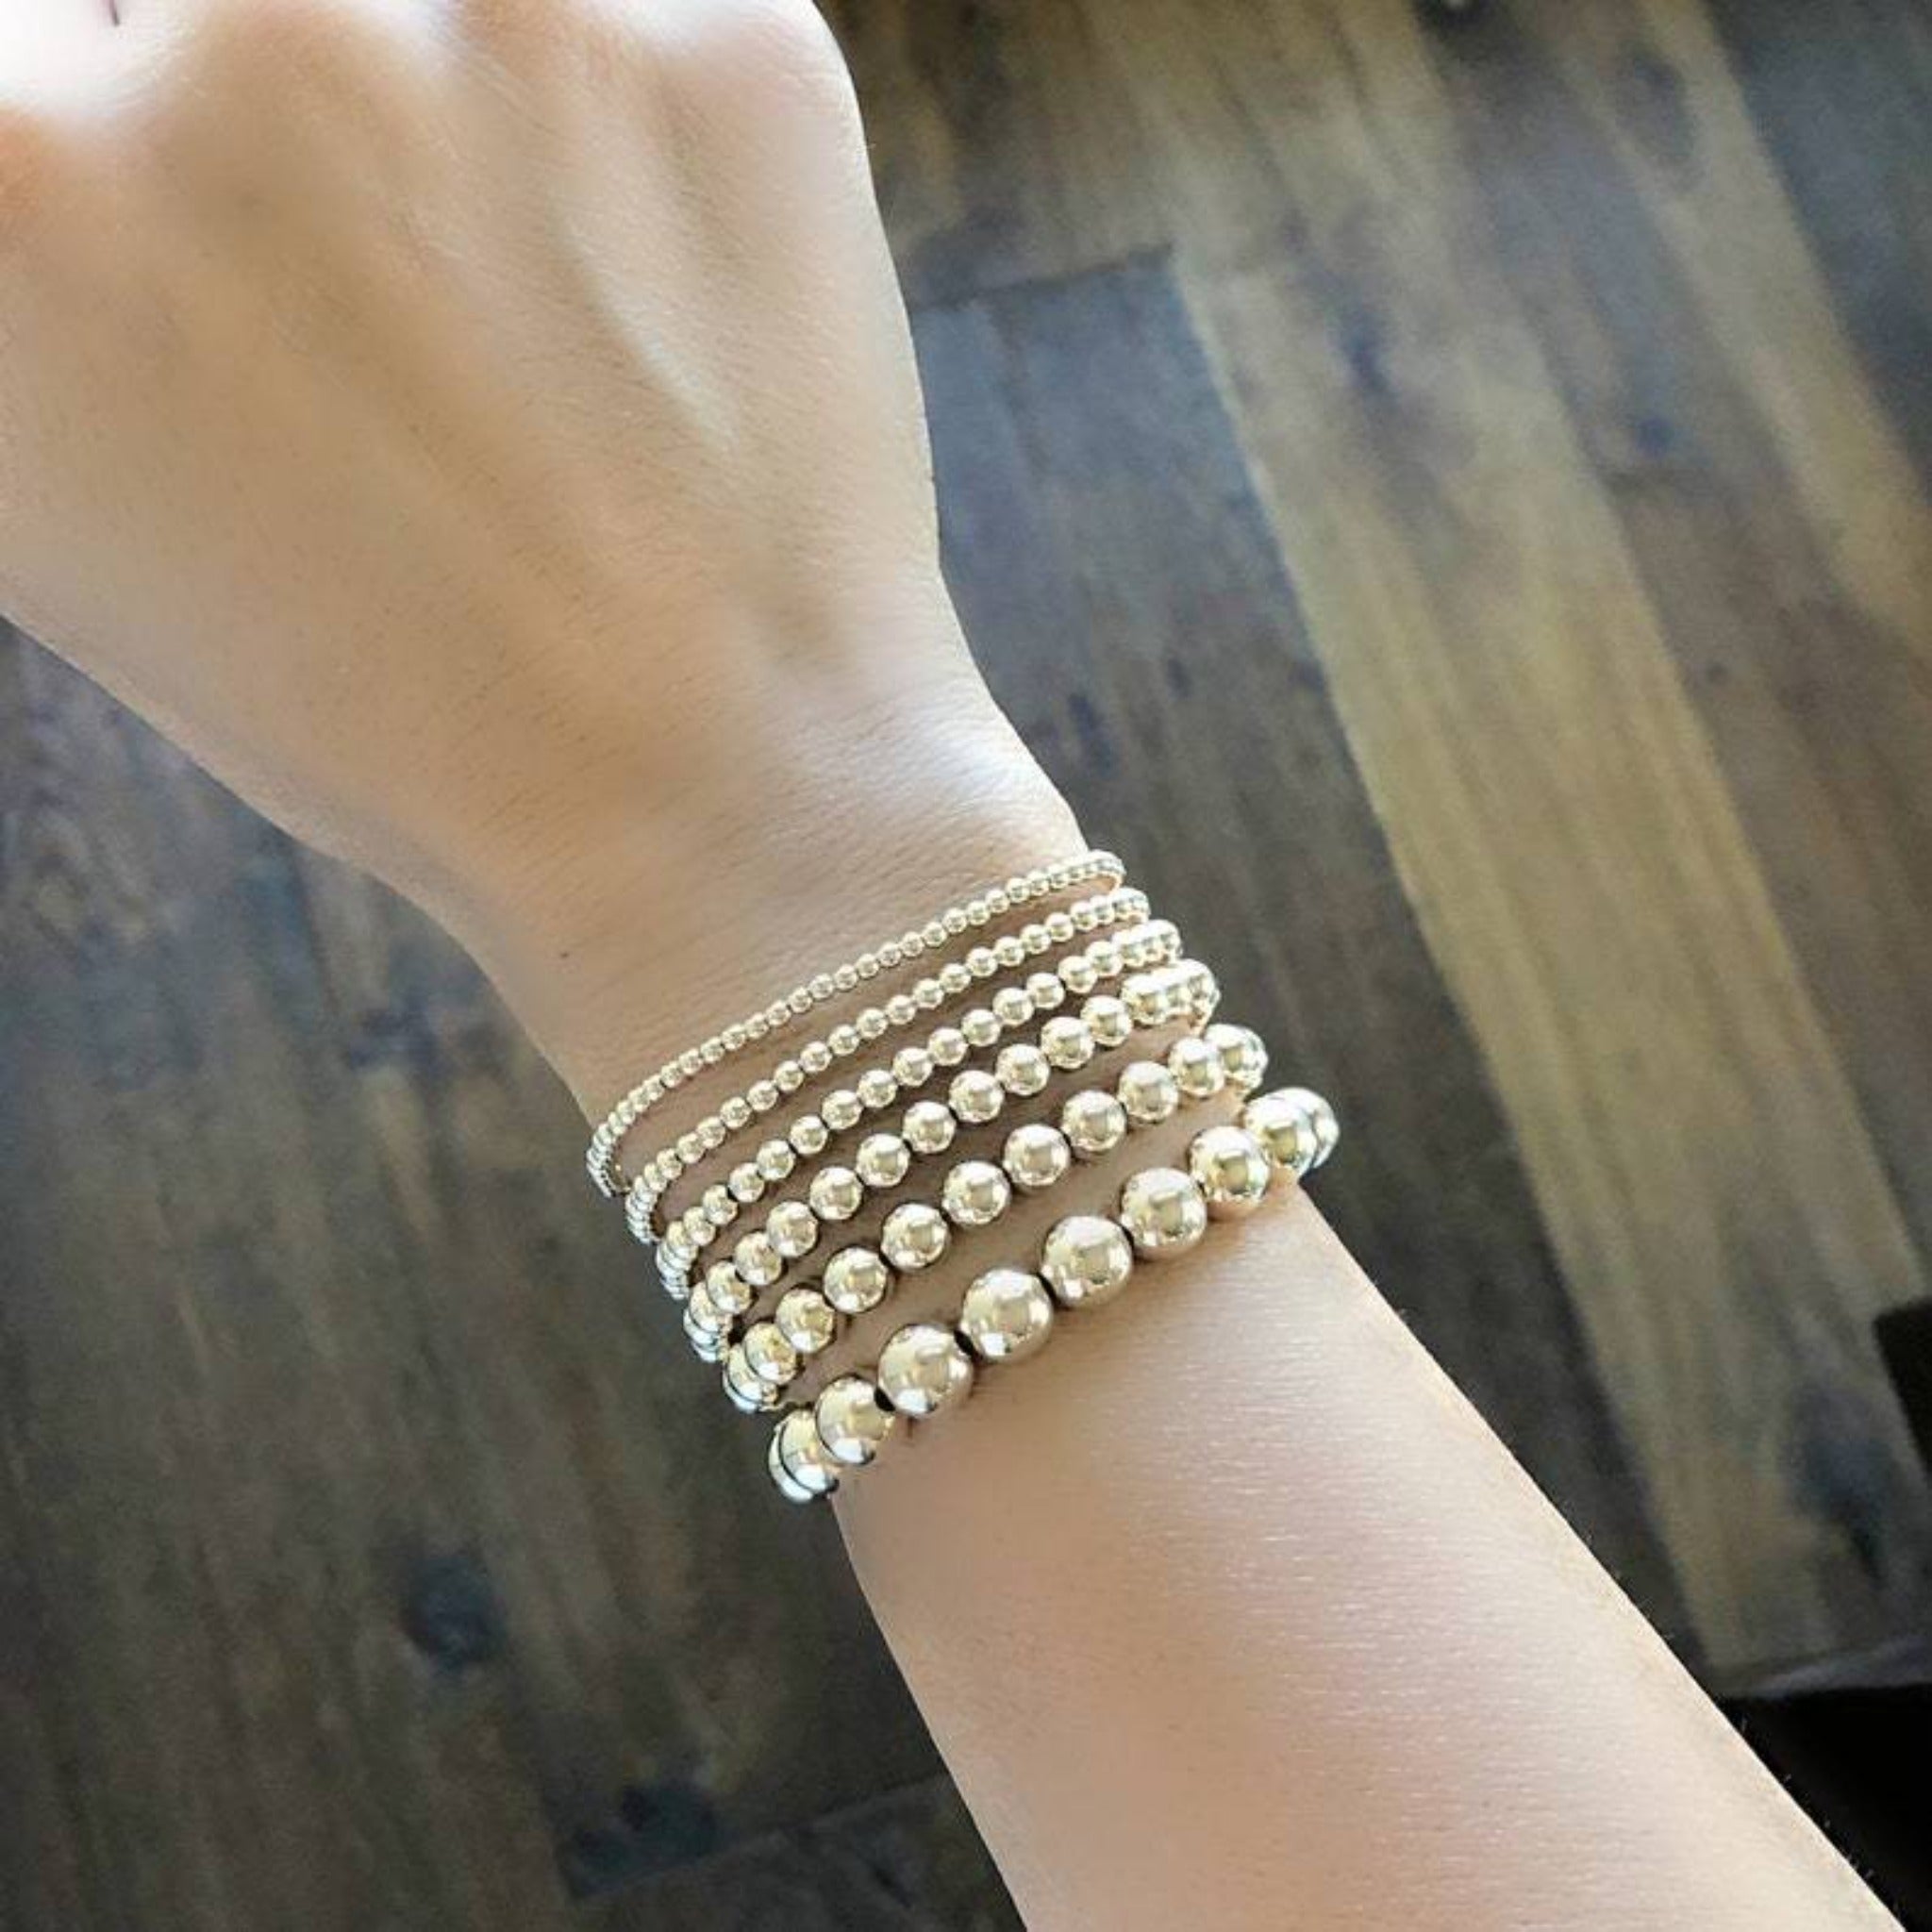 3mm, 4mm, 5mm and 6mm Beads Bracelet in Gold-Filled, Beaded Bracelets Full Set | 5 Bracelets 1x6mm 1x5mm 2x4mm 1x3mm